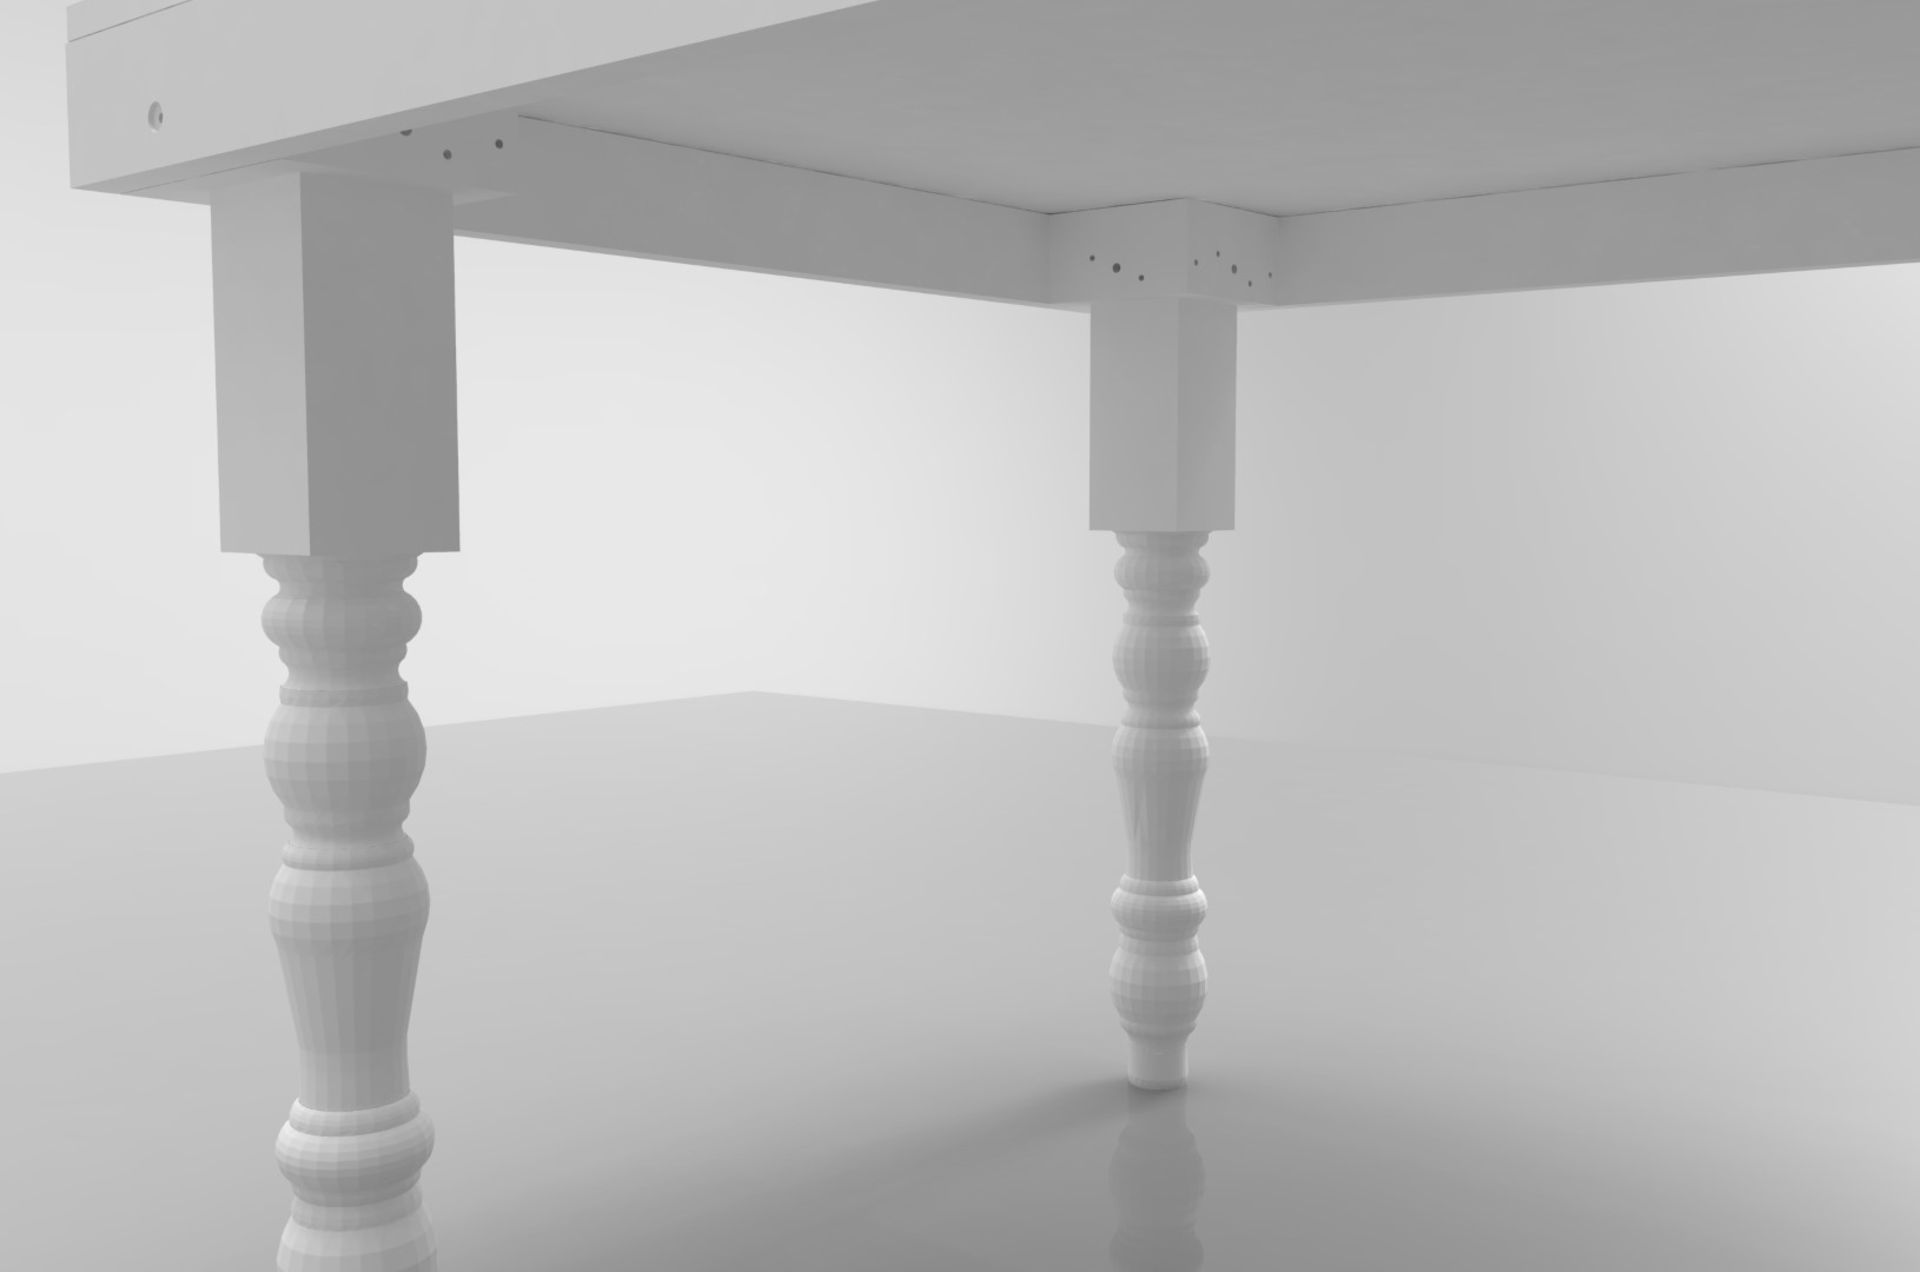 5 x Bespoke Rectangular Commercial Event / Dining Tables In White - Dimensions: 198cm x D99 x H74cm - Image 5 of 5